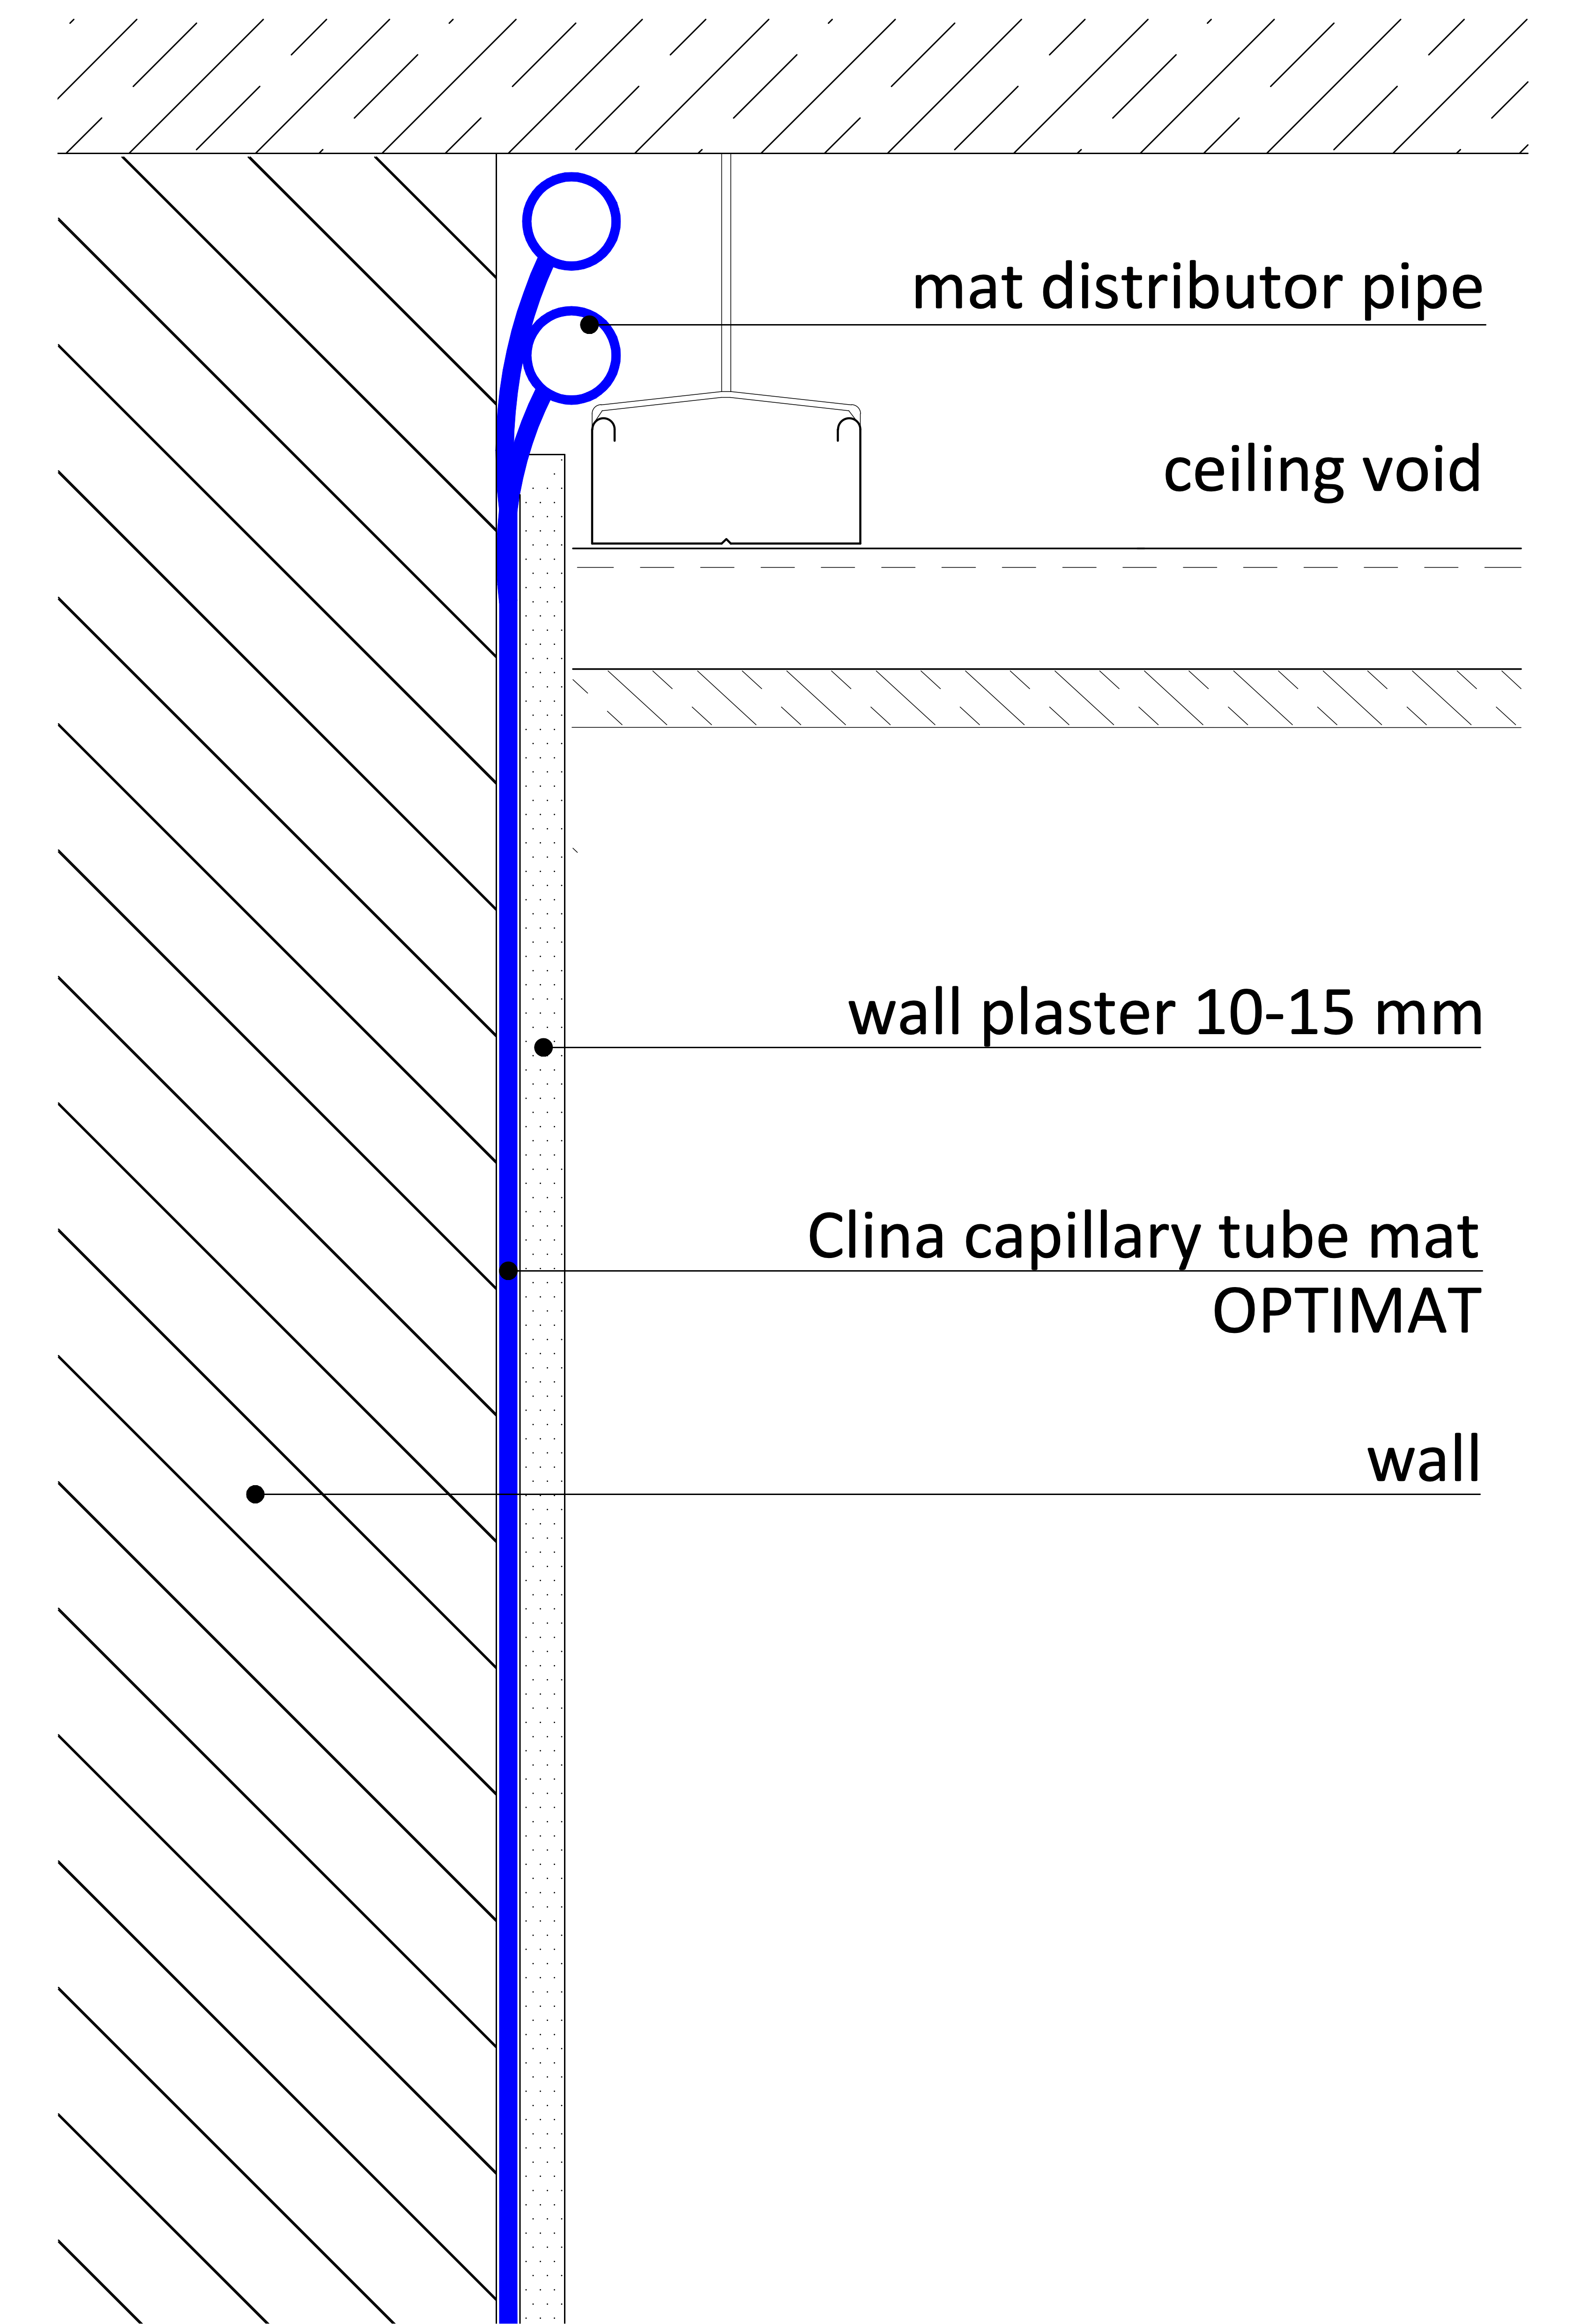 Section view plaster on GBD or brickwork or concrete_wall_MDP in ceiling void